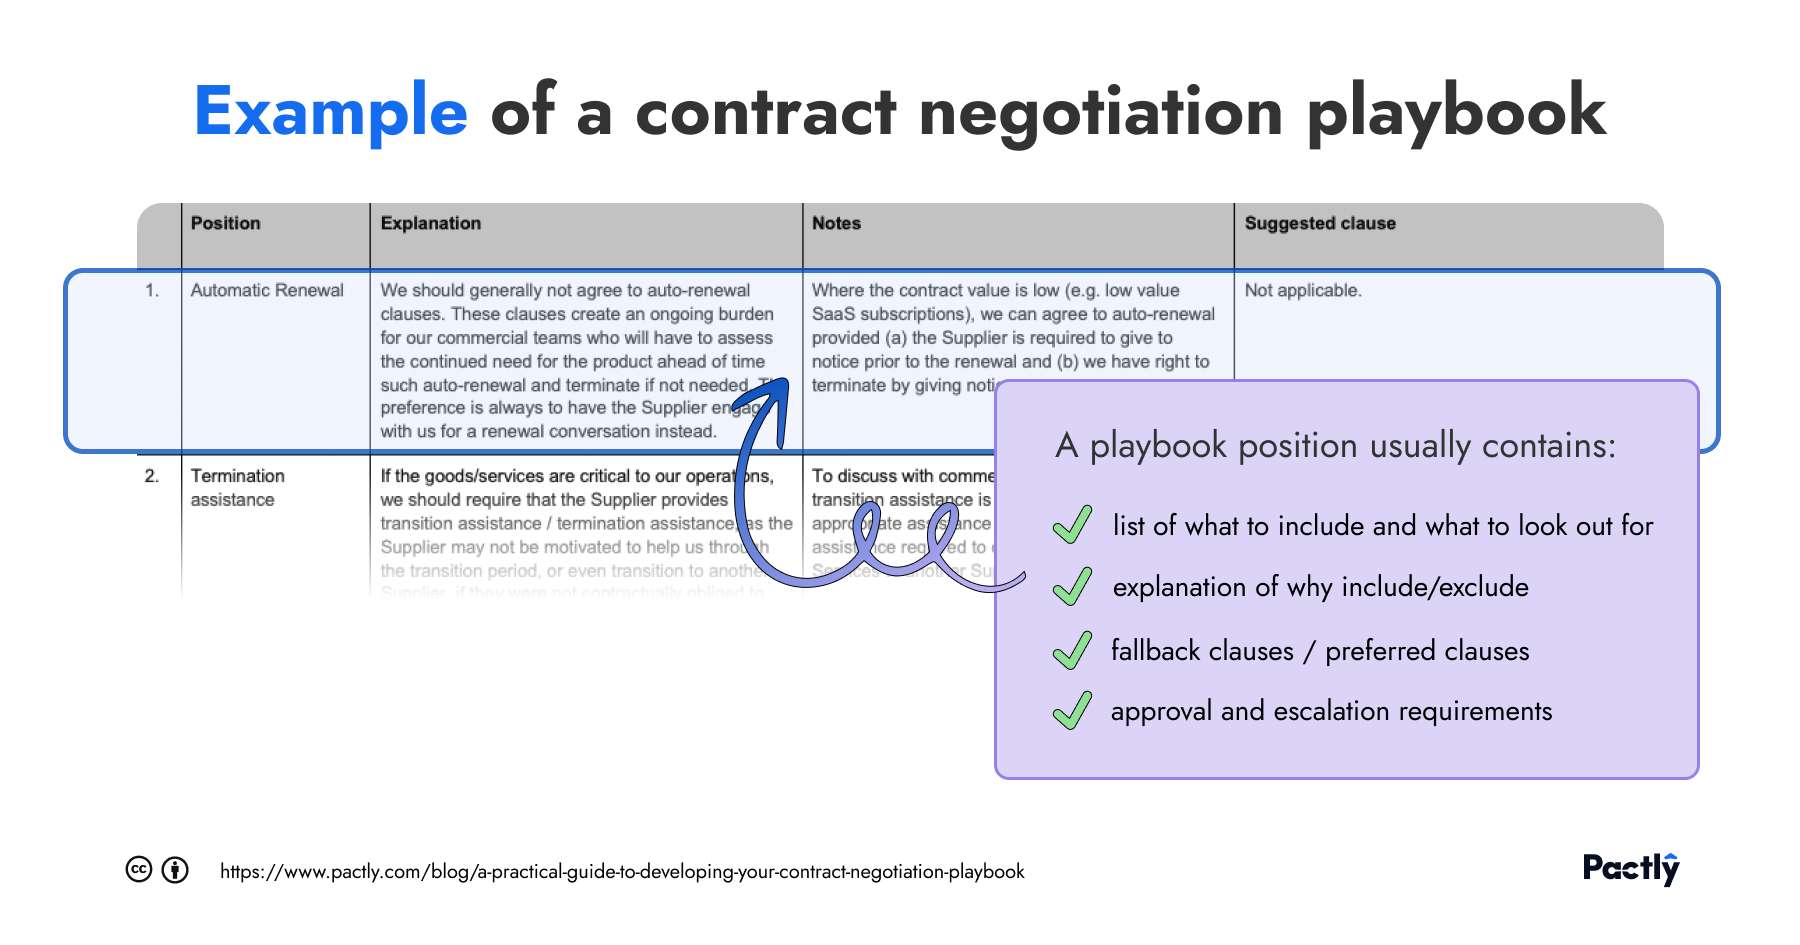 Image snippet of an example of a contract negotiation playbook